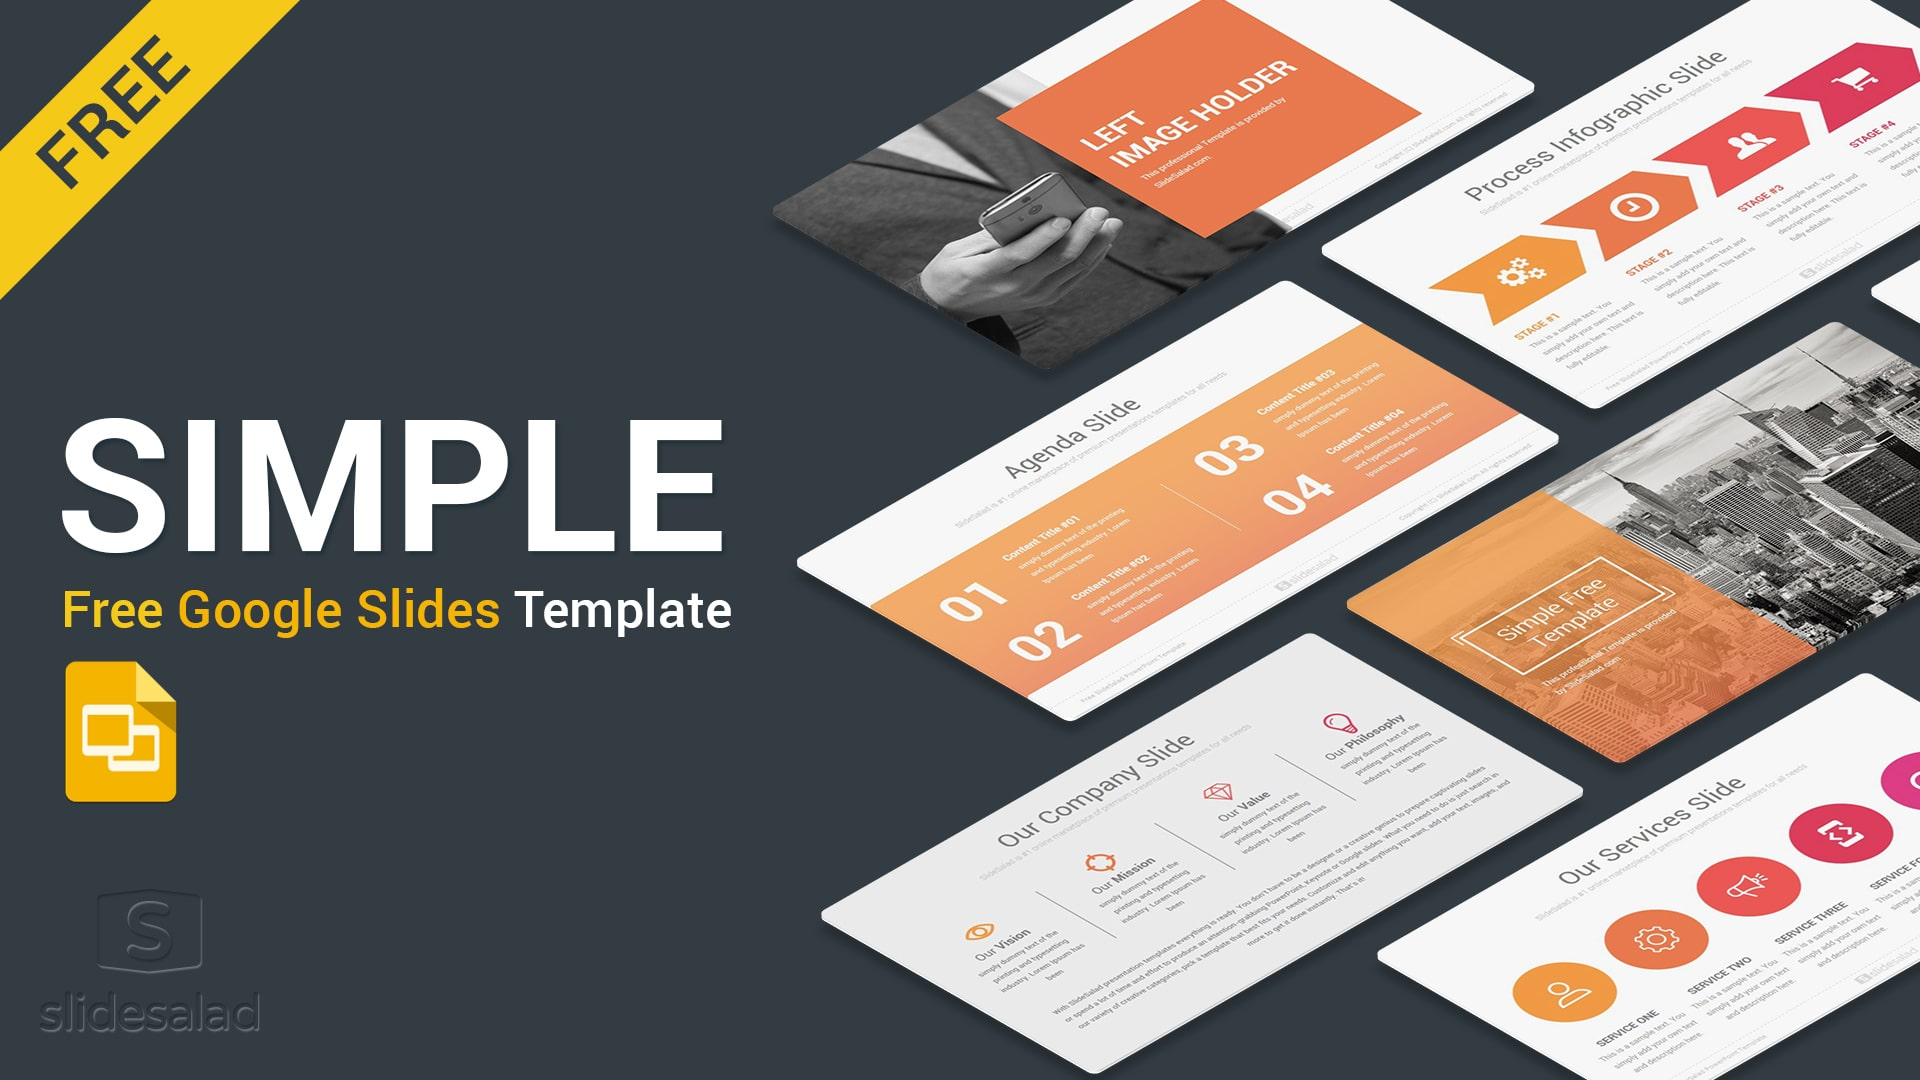 Best Free Presentation Templates Professional Designs 2020 Intended For Business Card Template Powerpoint Free